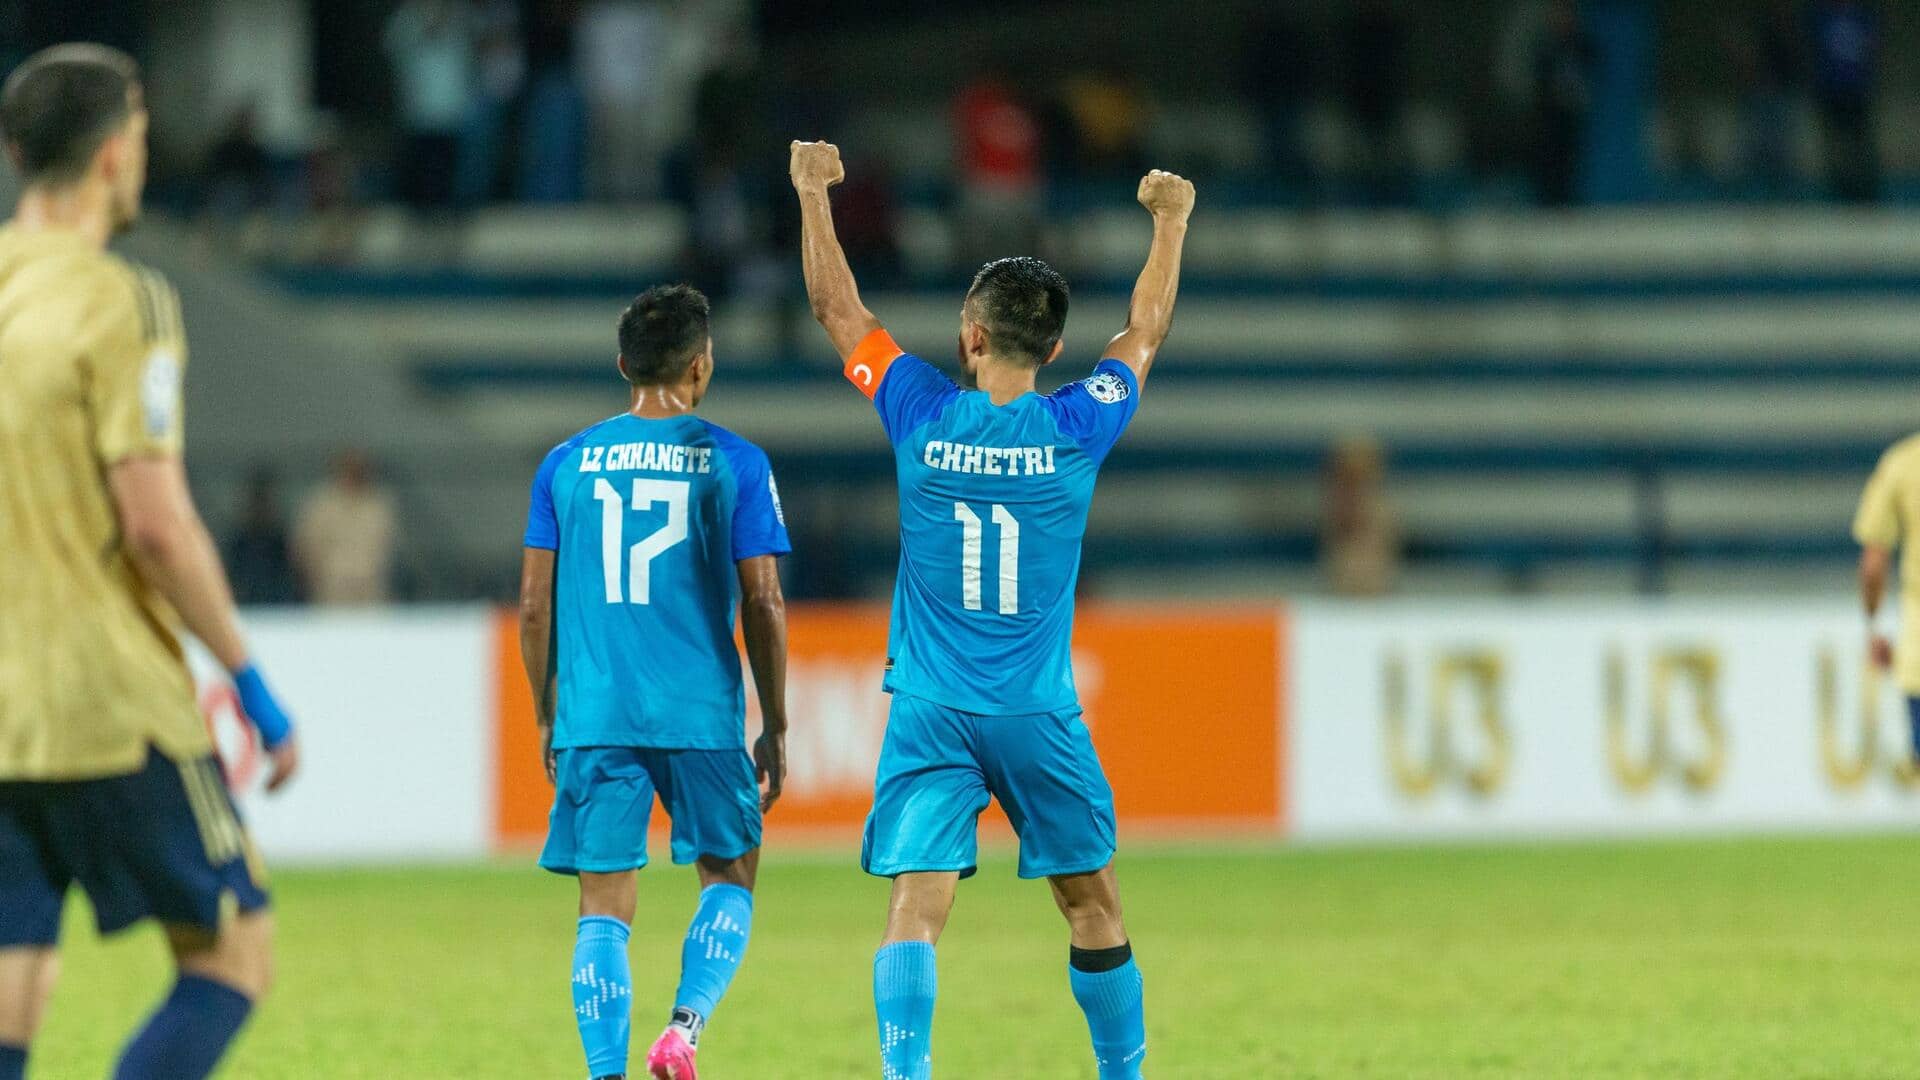 Sunil Chhetri becomes joint-top scorer in SAFF Championship history: Stats